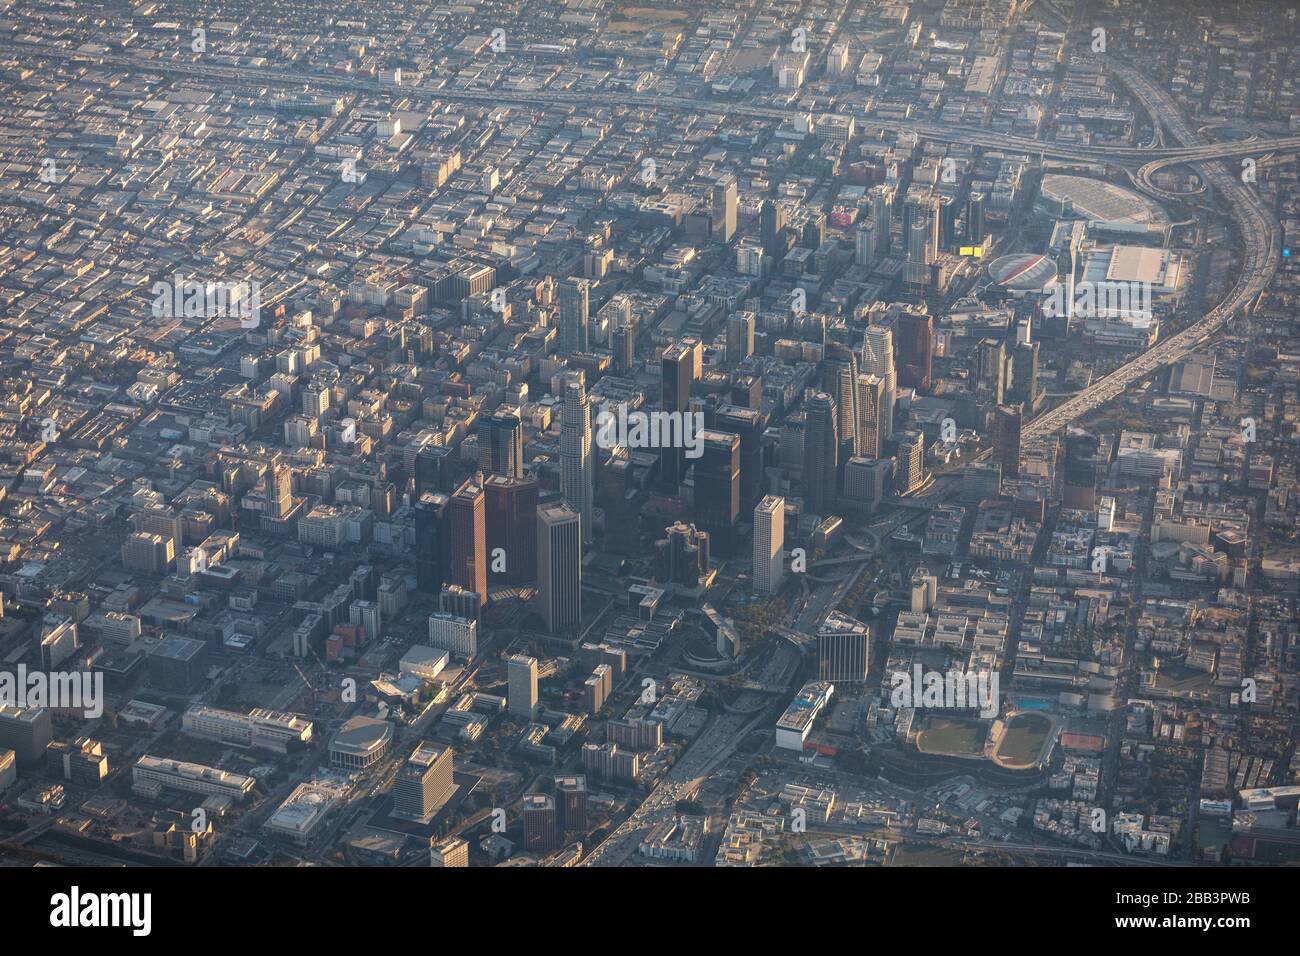 General overall aerial view of downtown Los Angeles during a flight around Southern California on Saturday, October 5, 2019, in Los Angeles, California, USA. (Photo by IOS/Espa-Images) Stock Photo